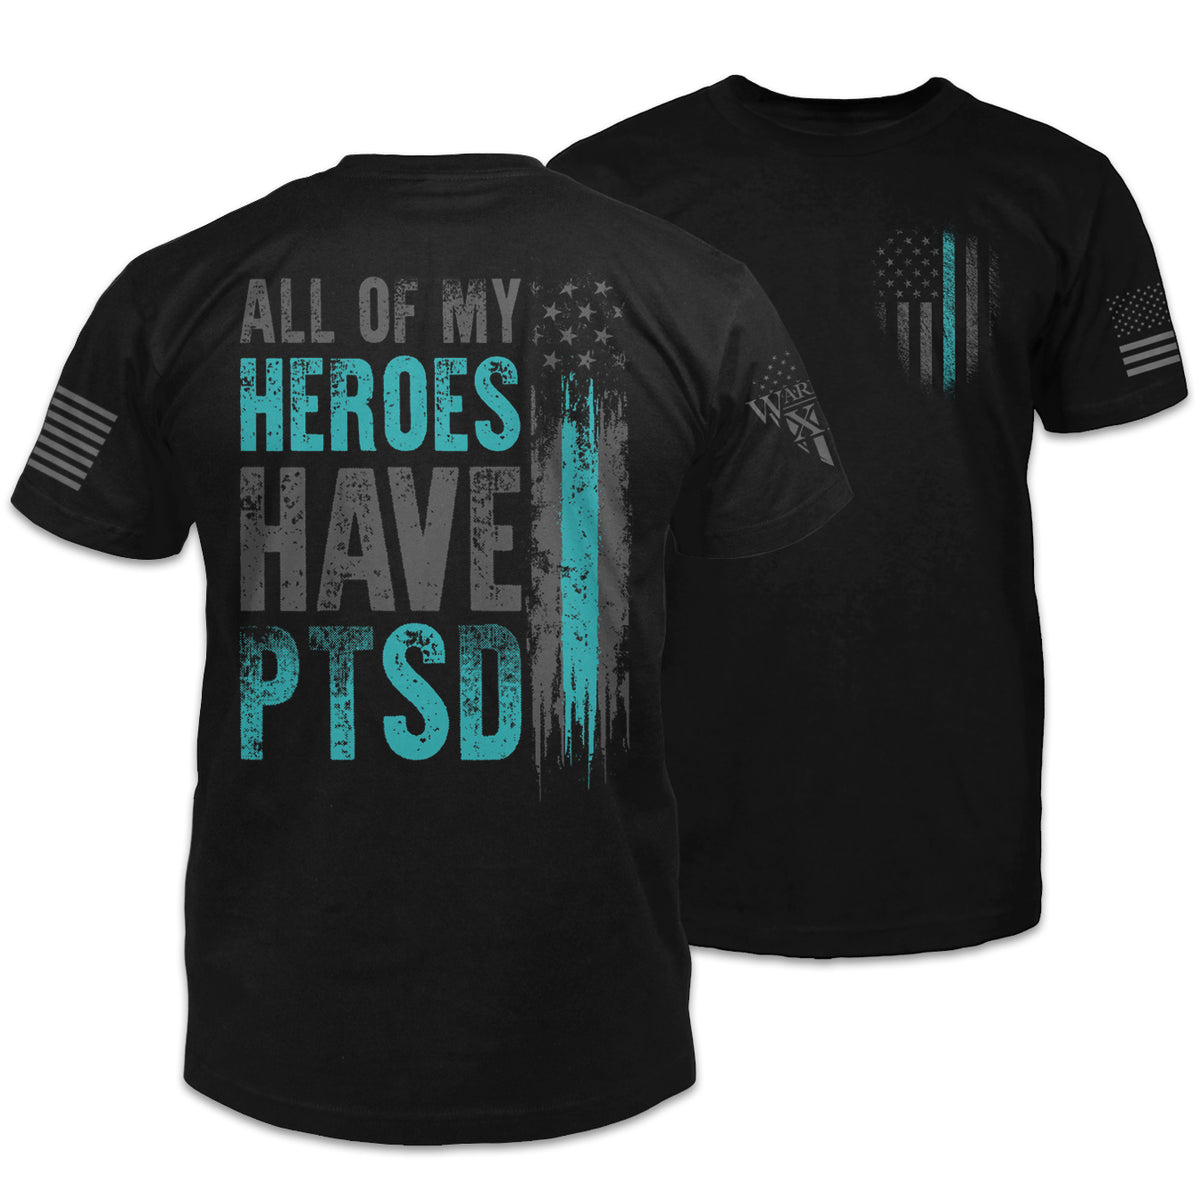 "All Of My Heroes Have PTSD" is printed on a black t-shirt with the main design printed on the back and a small print on the front left chest. This shirt features our brand logo on the right sleeve and the American Flag on the left sleeve.